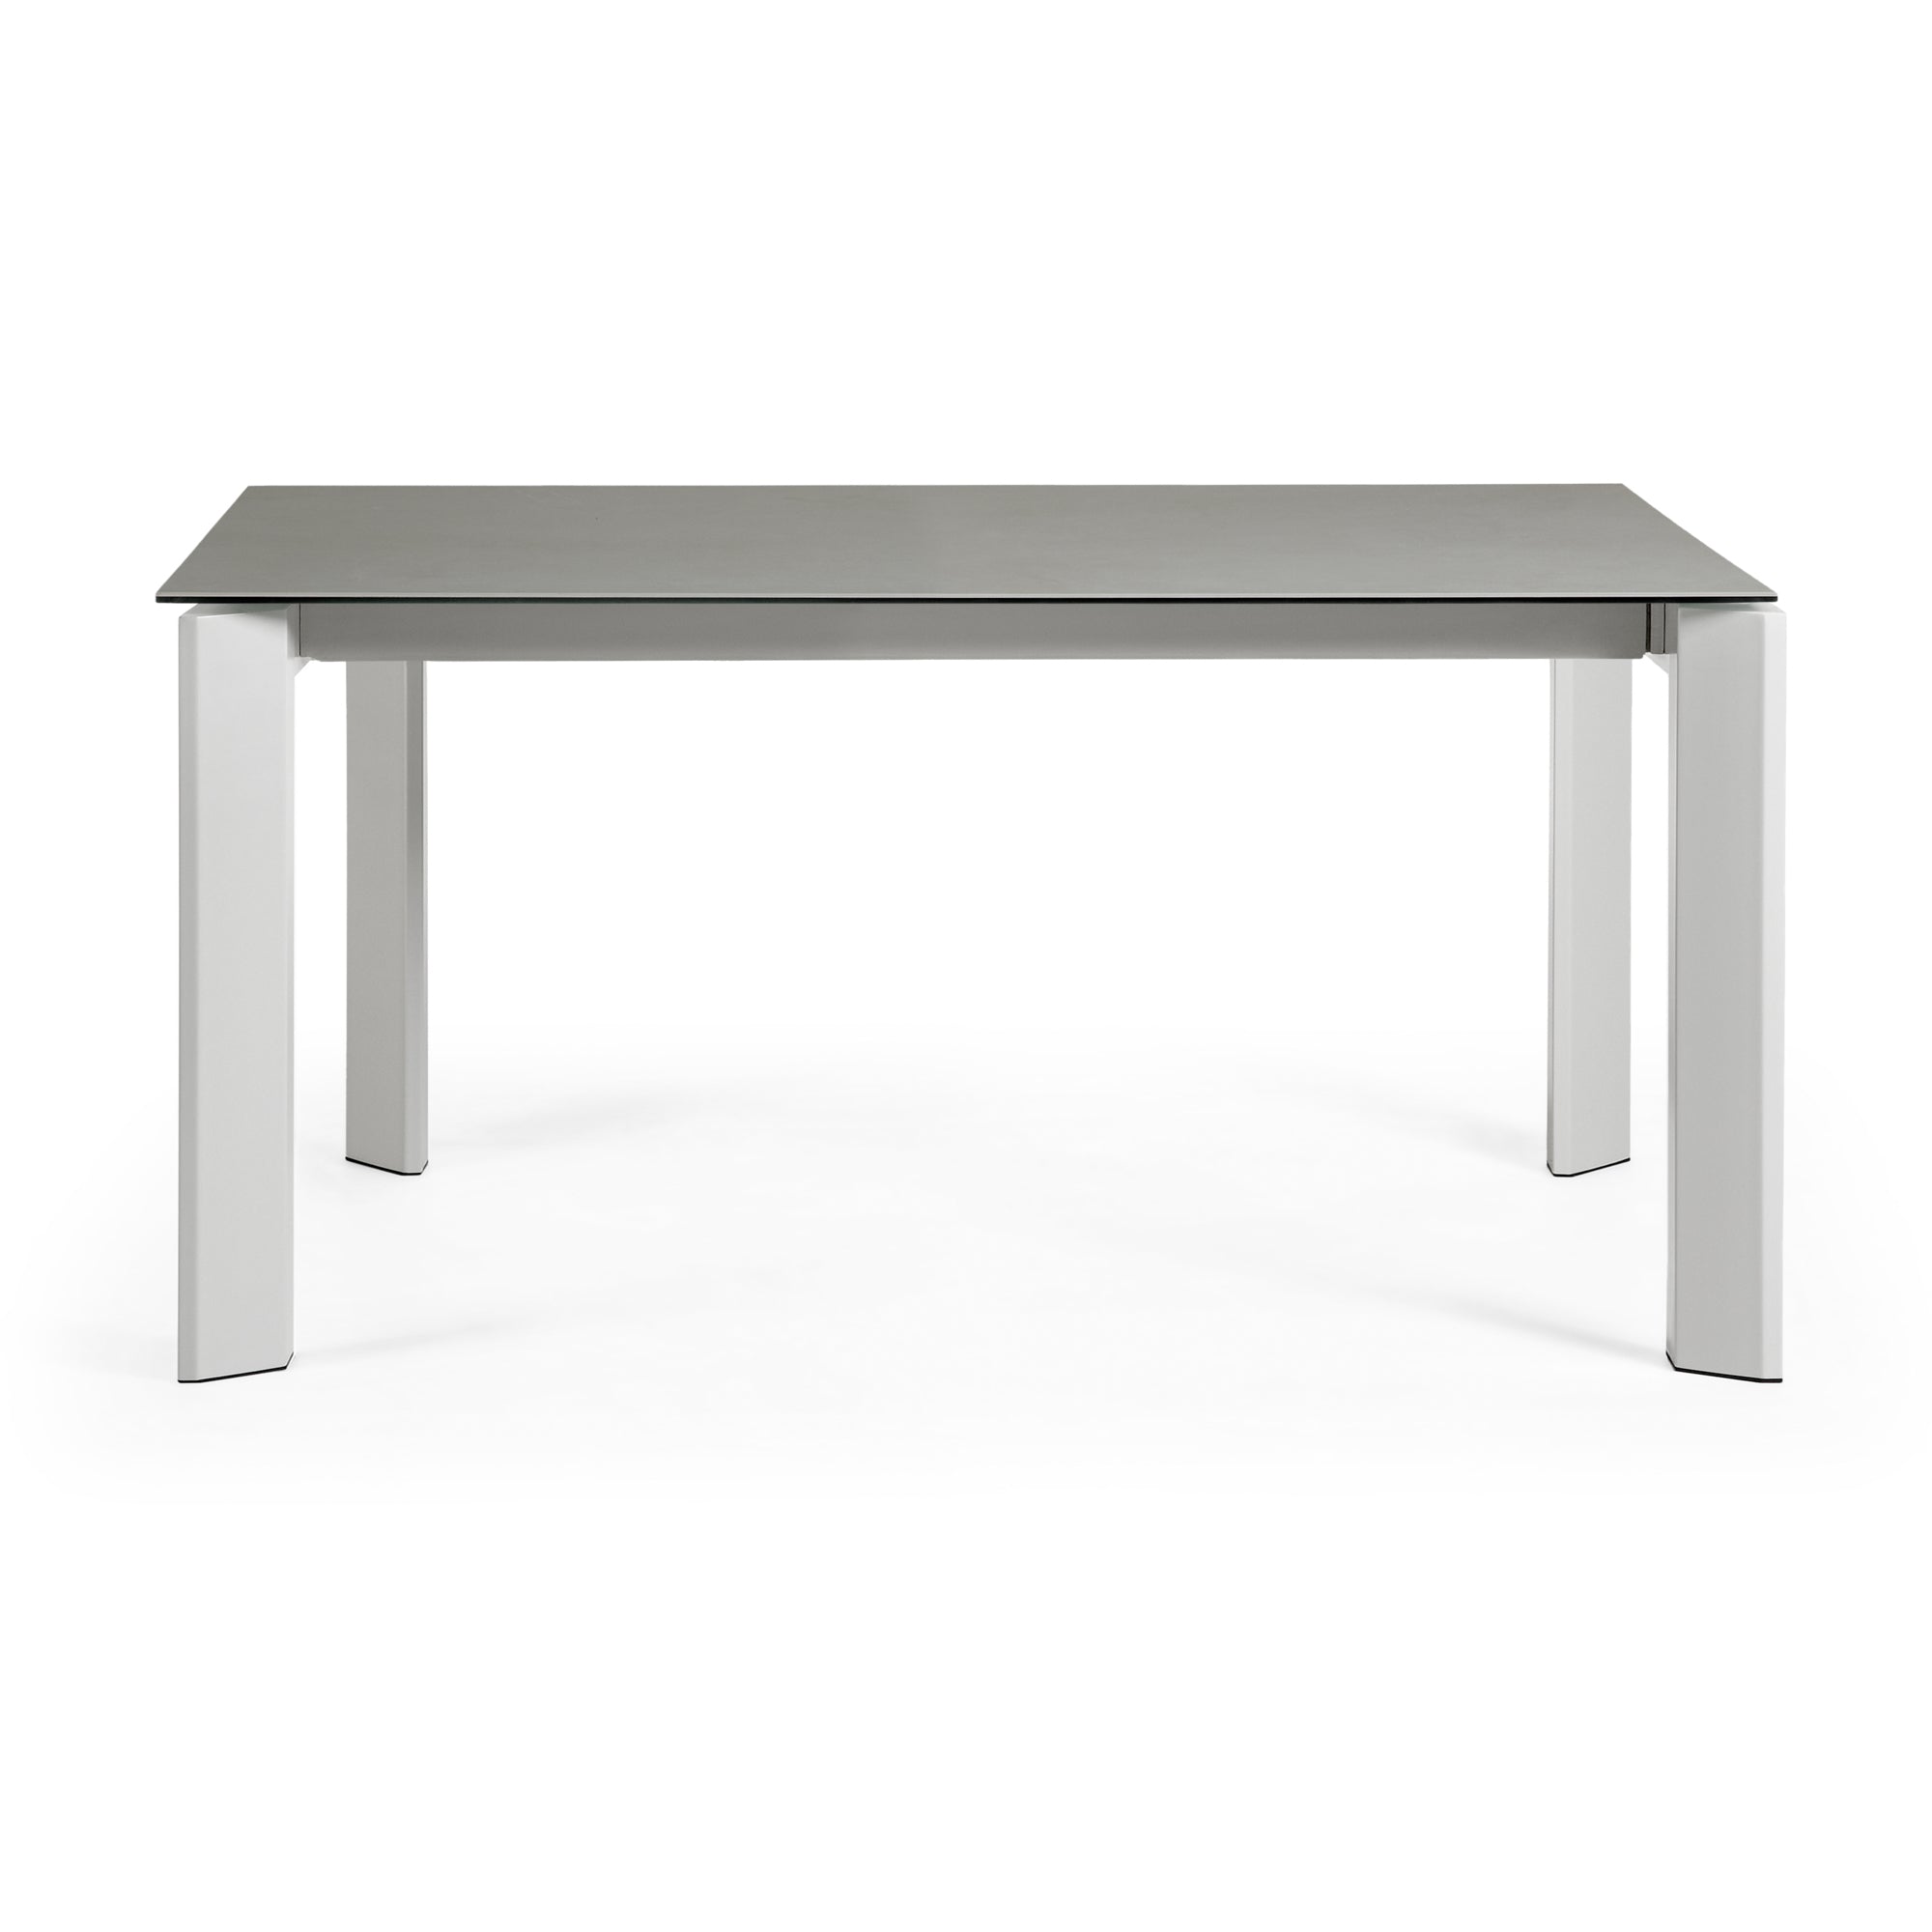 Axis porcelain extendable table with Hydra Lead finish and gray legs 160 (220) cm